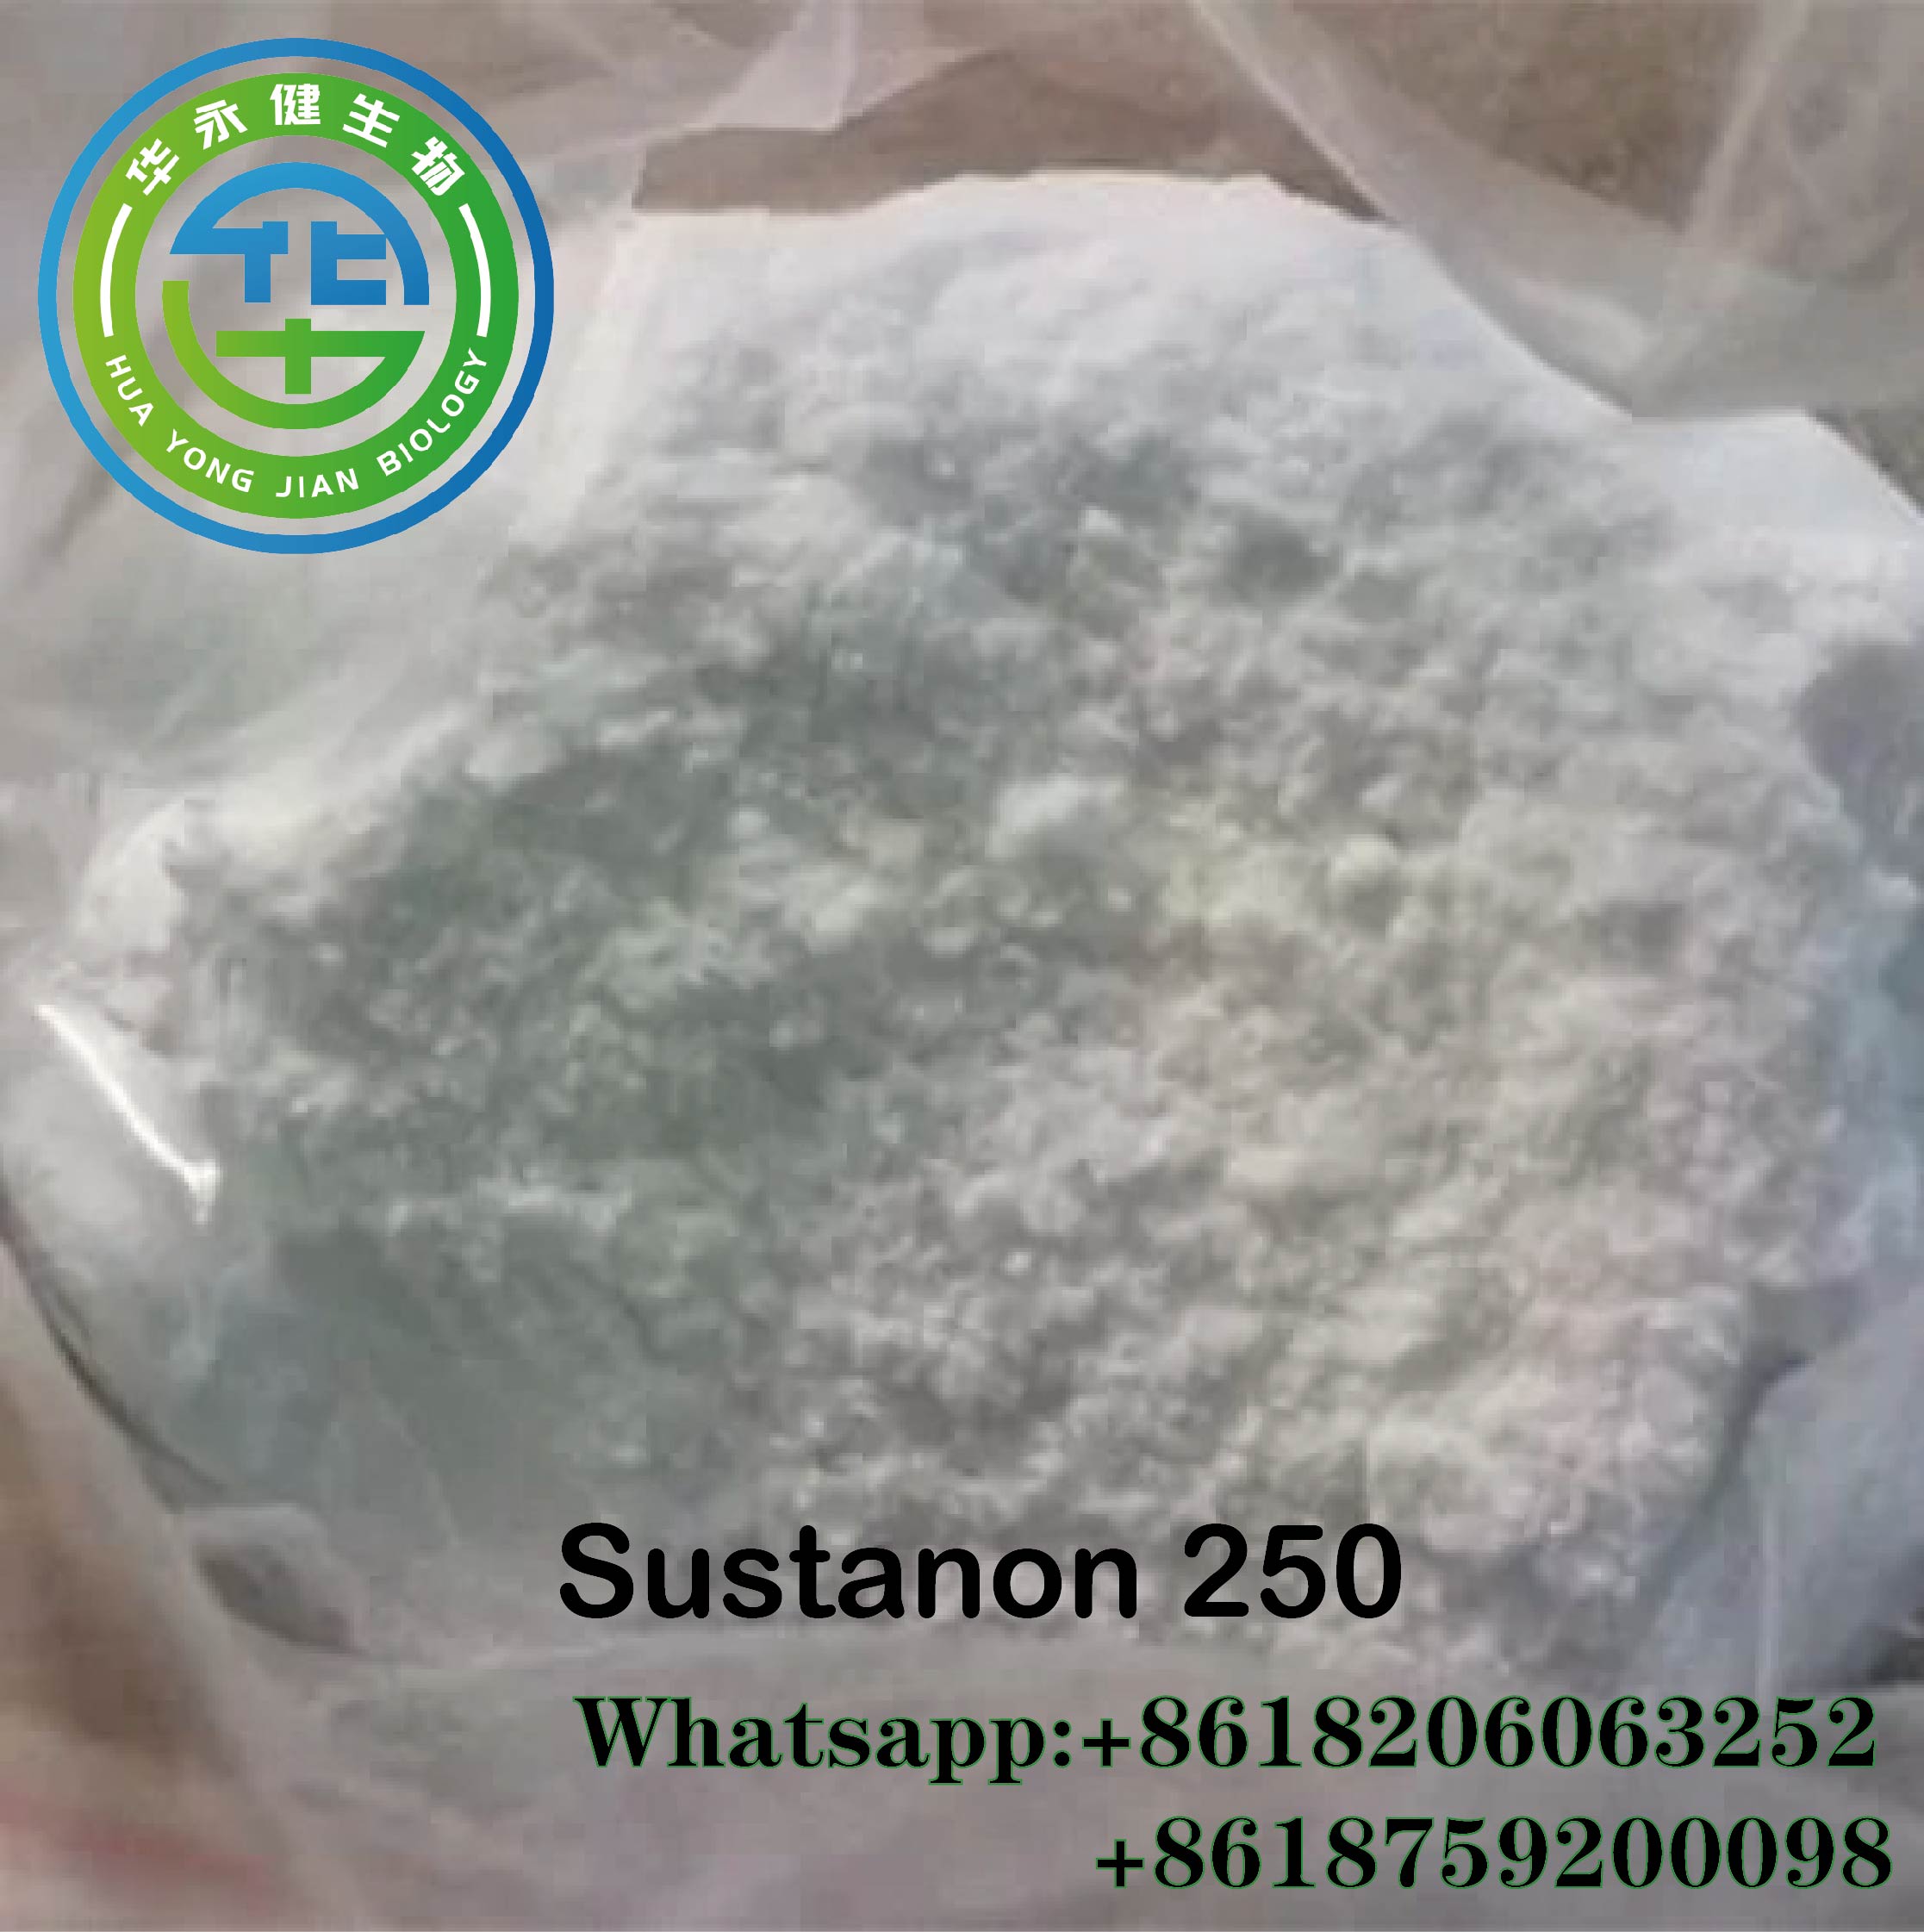 Male Enhancement S250 Oral Anabolic Steroids Testosterone Sustanon 250 Muscle Growth Steroids Powder Featured Image